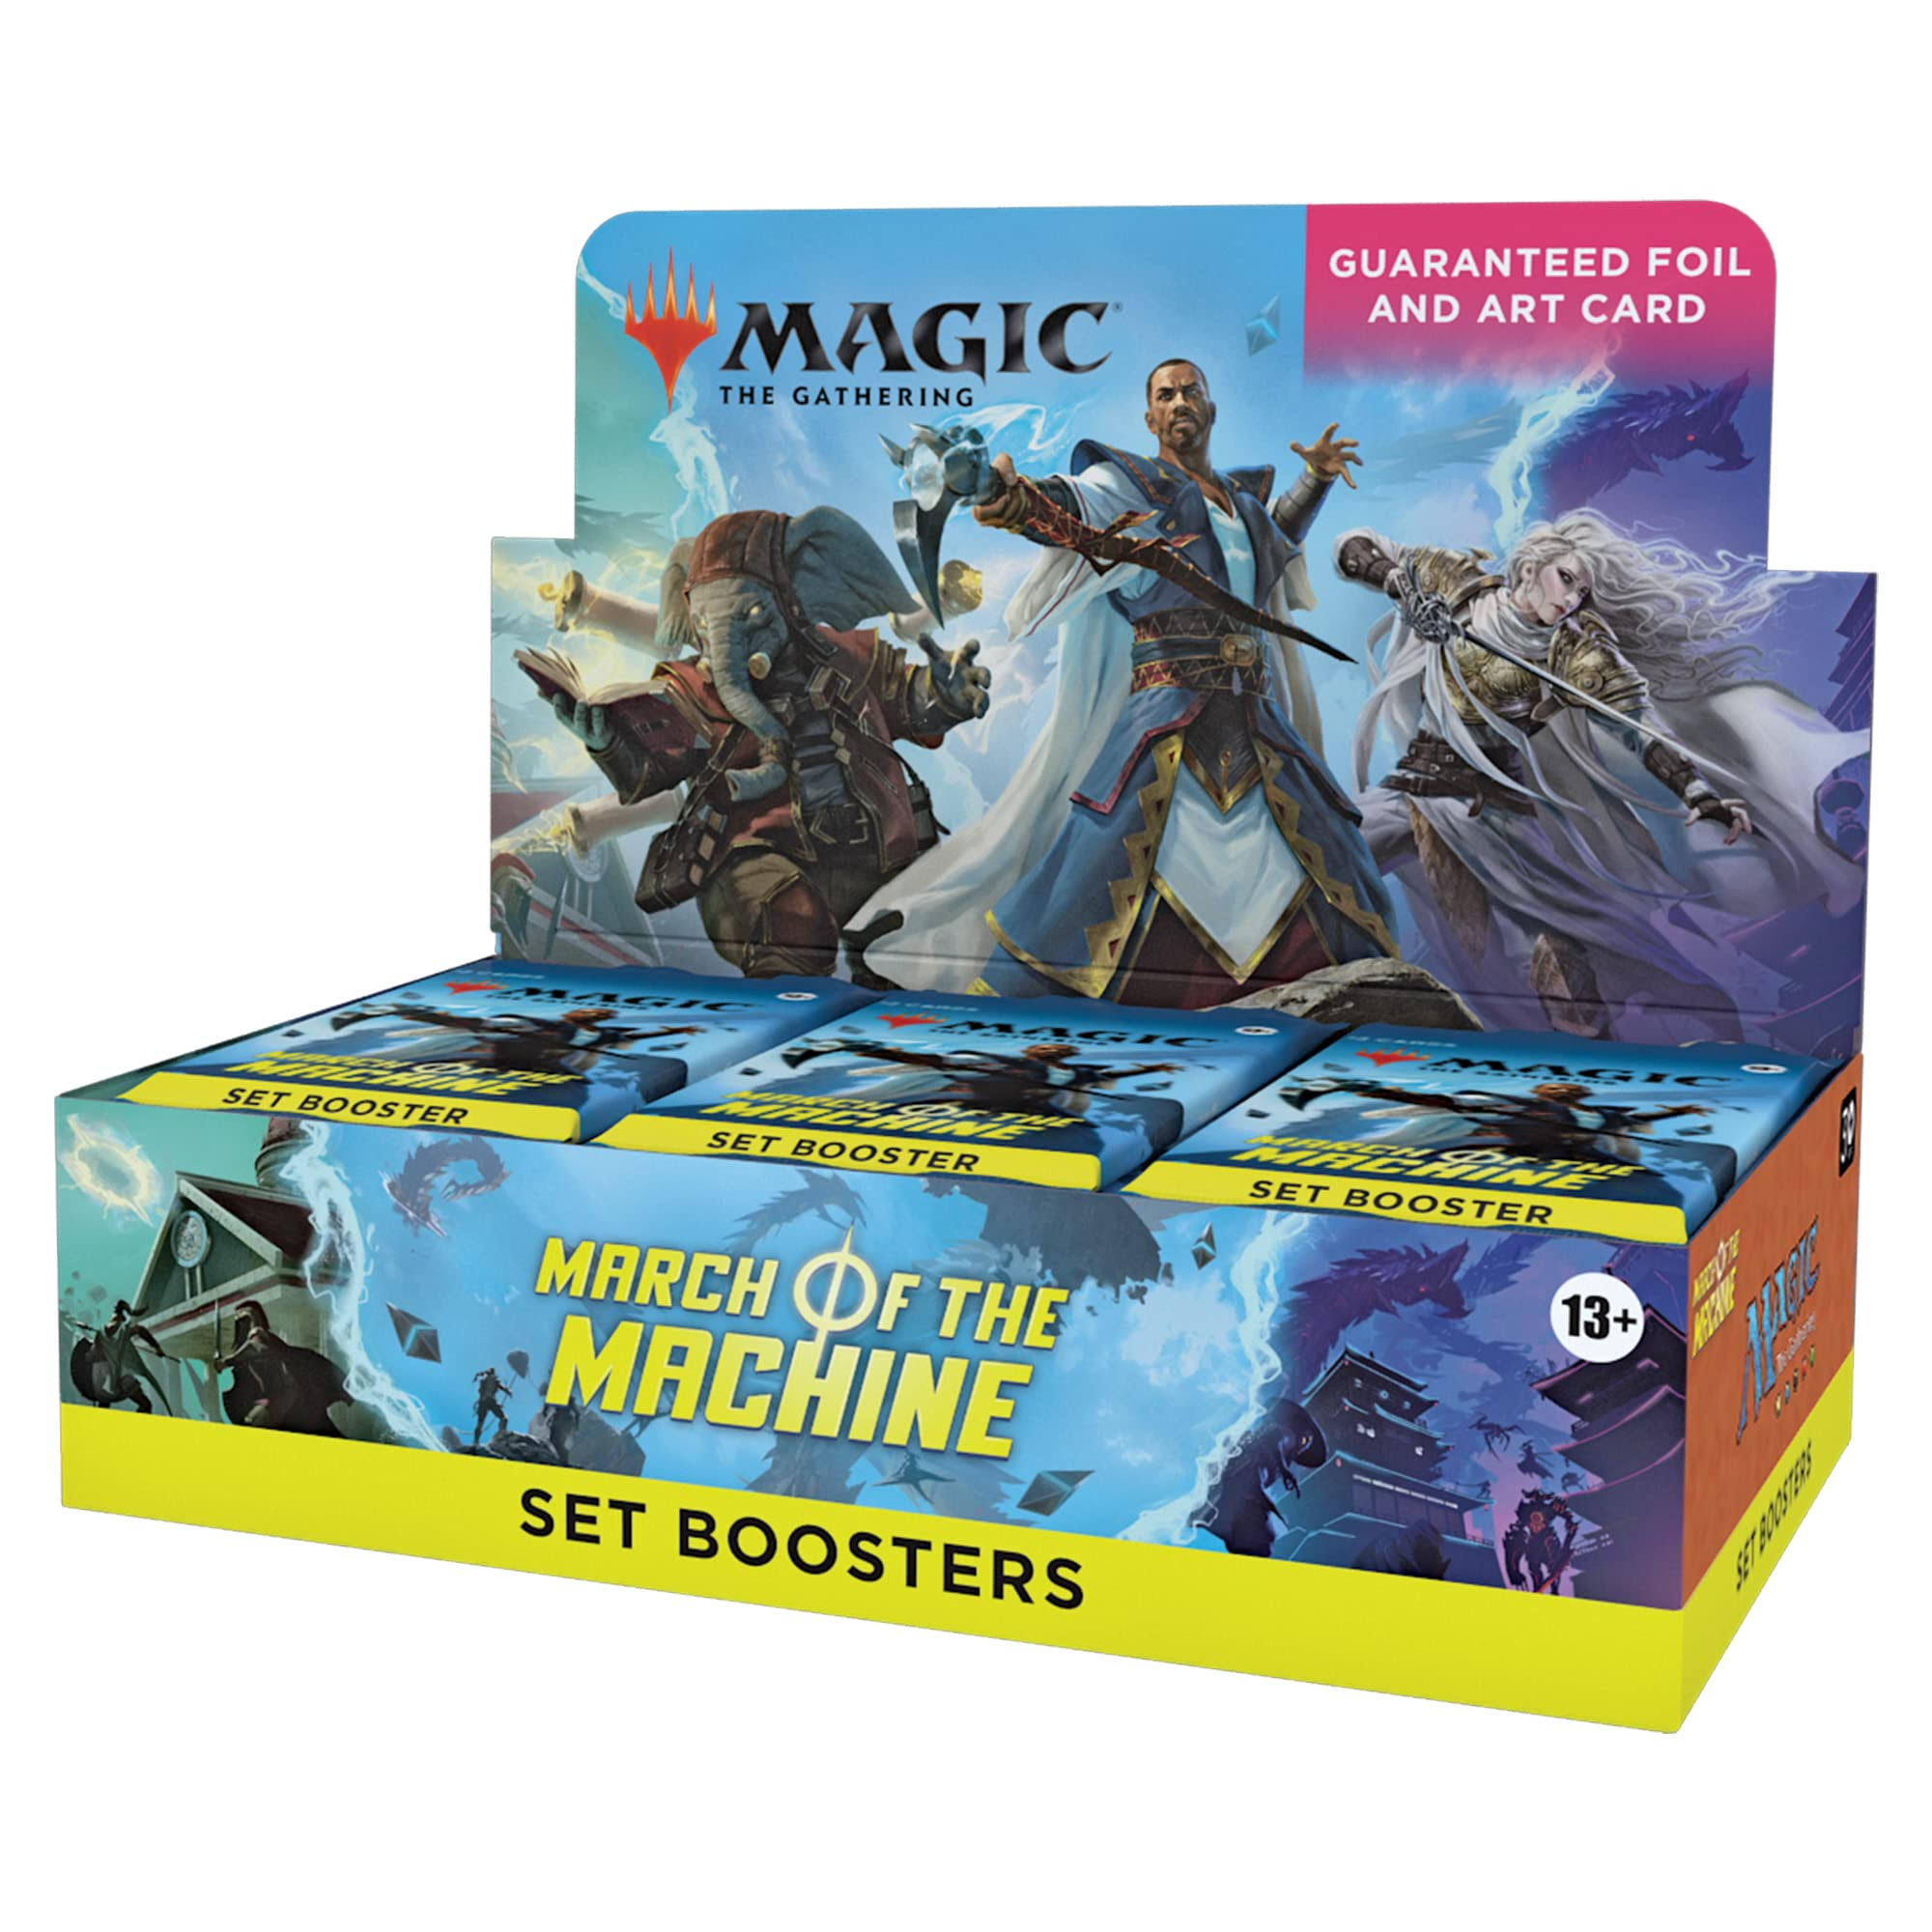 Magic The Gathering - March of The Machine Set Booster Box